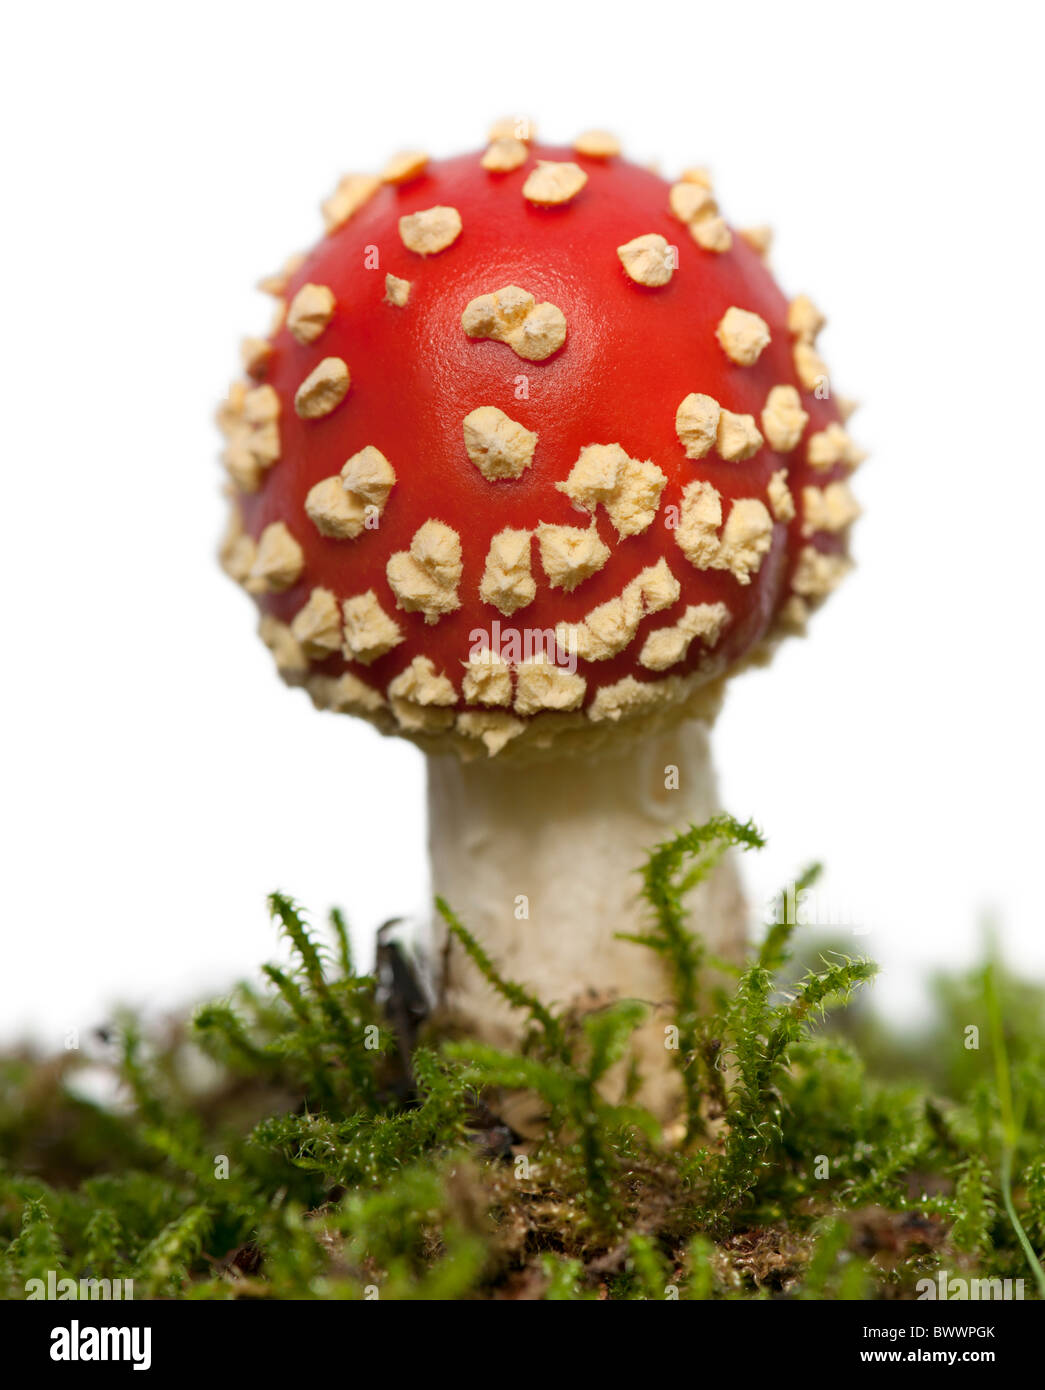 Fly agaric or fly Amanita mushroom, Amanita muscaria, in front of white background Stock Photo